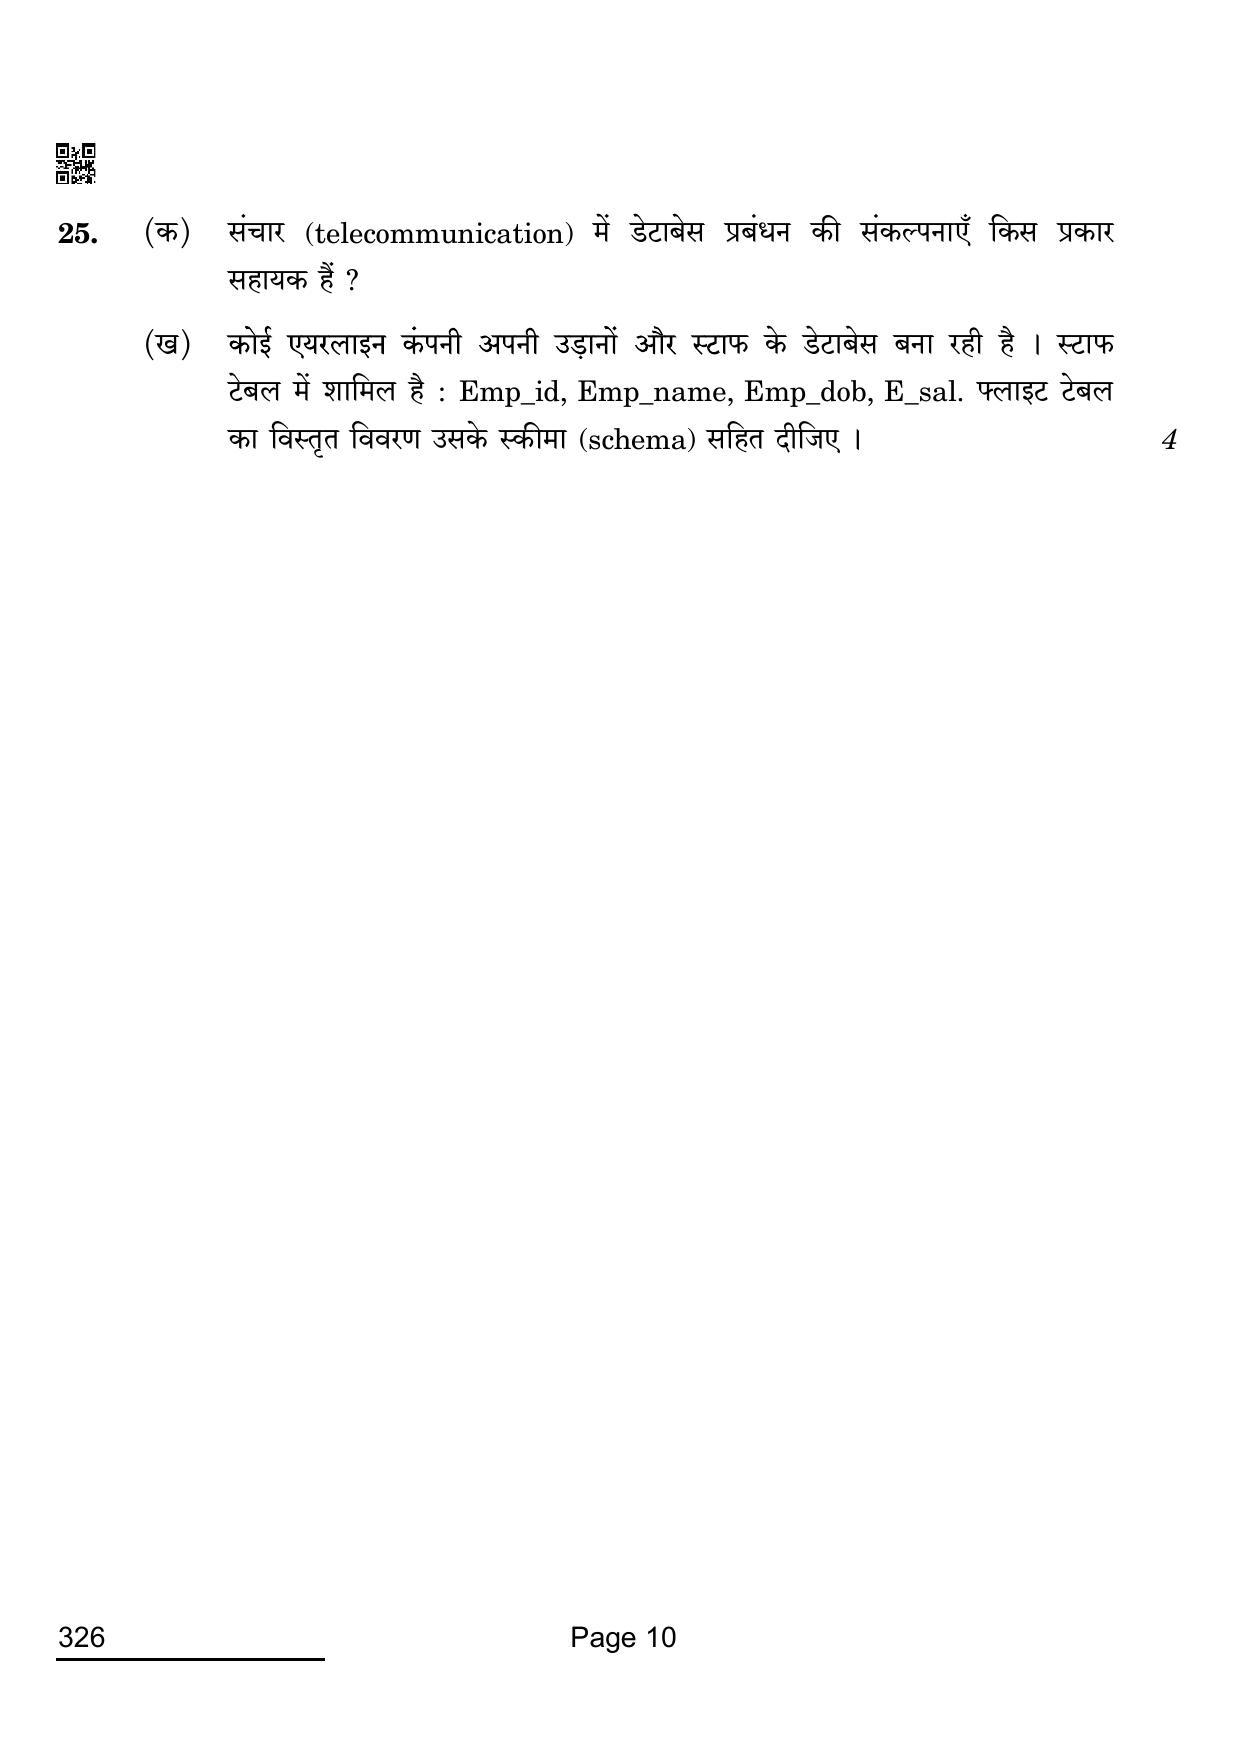 CBSE Class 12 326_Information Technology 2022 Question Paper - Page 10